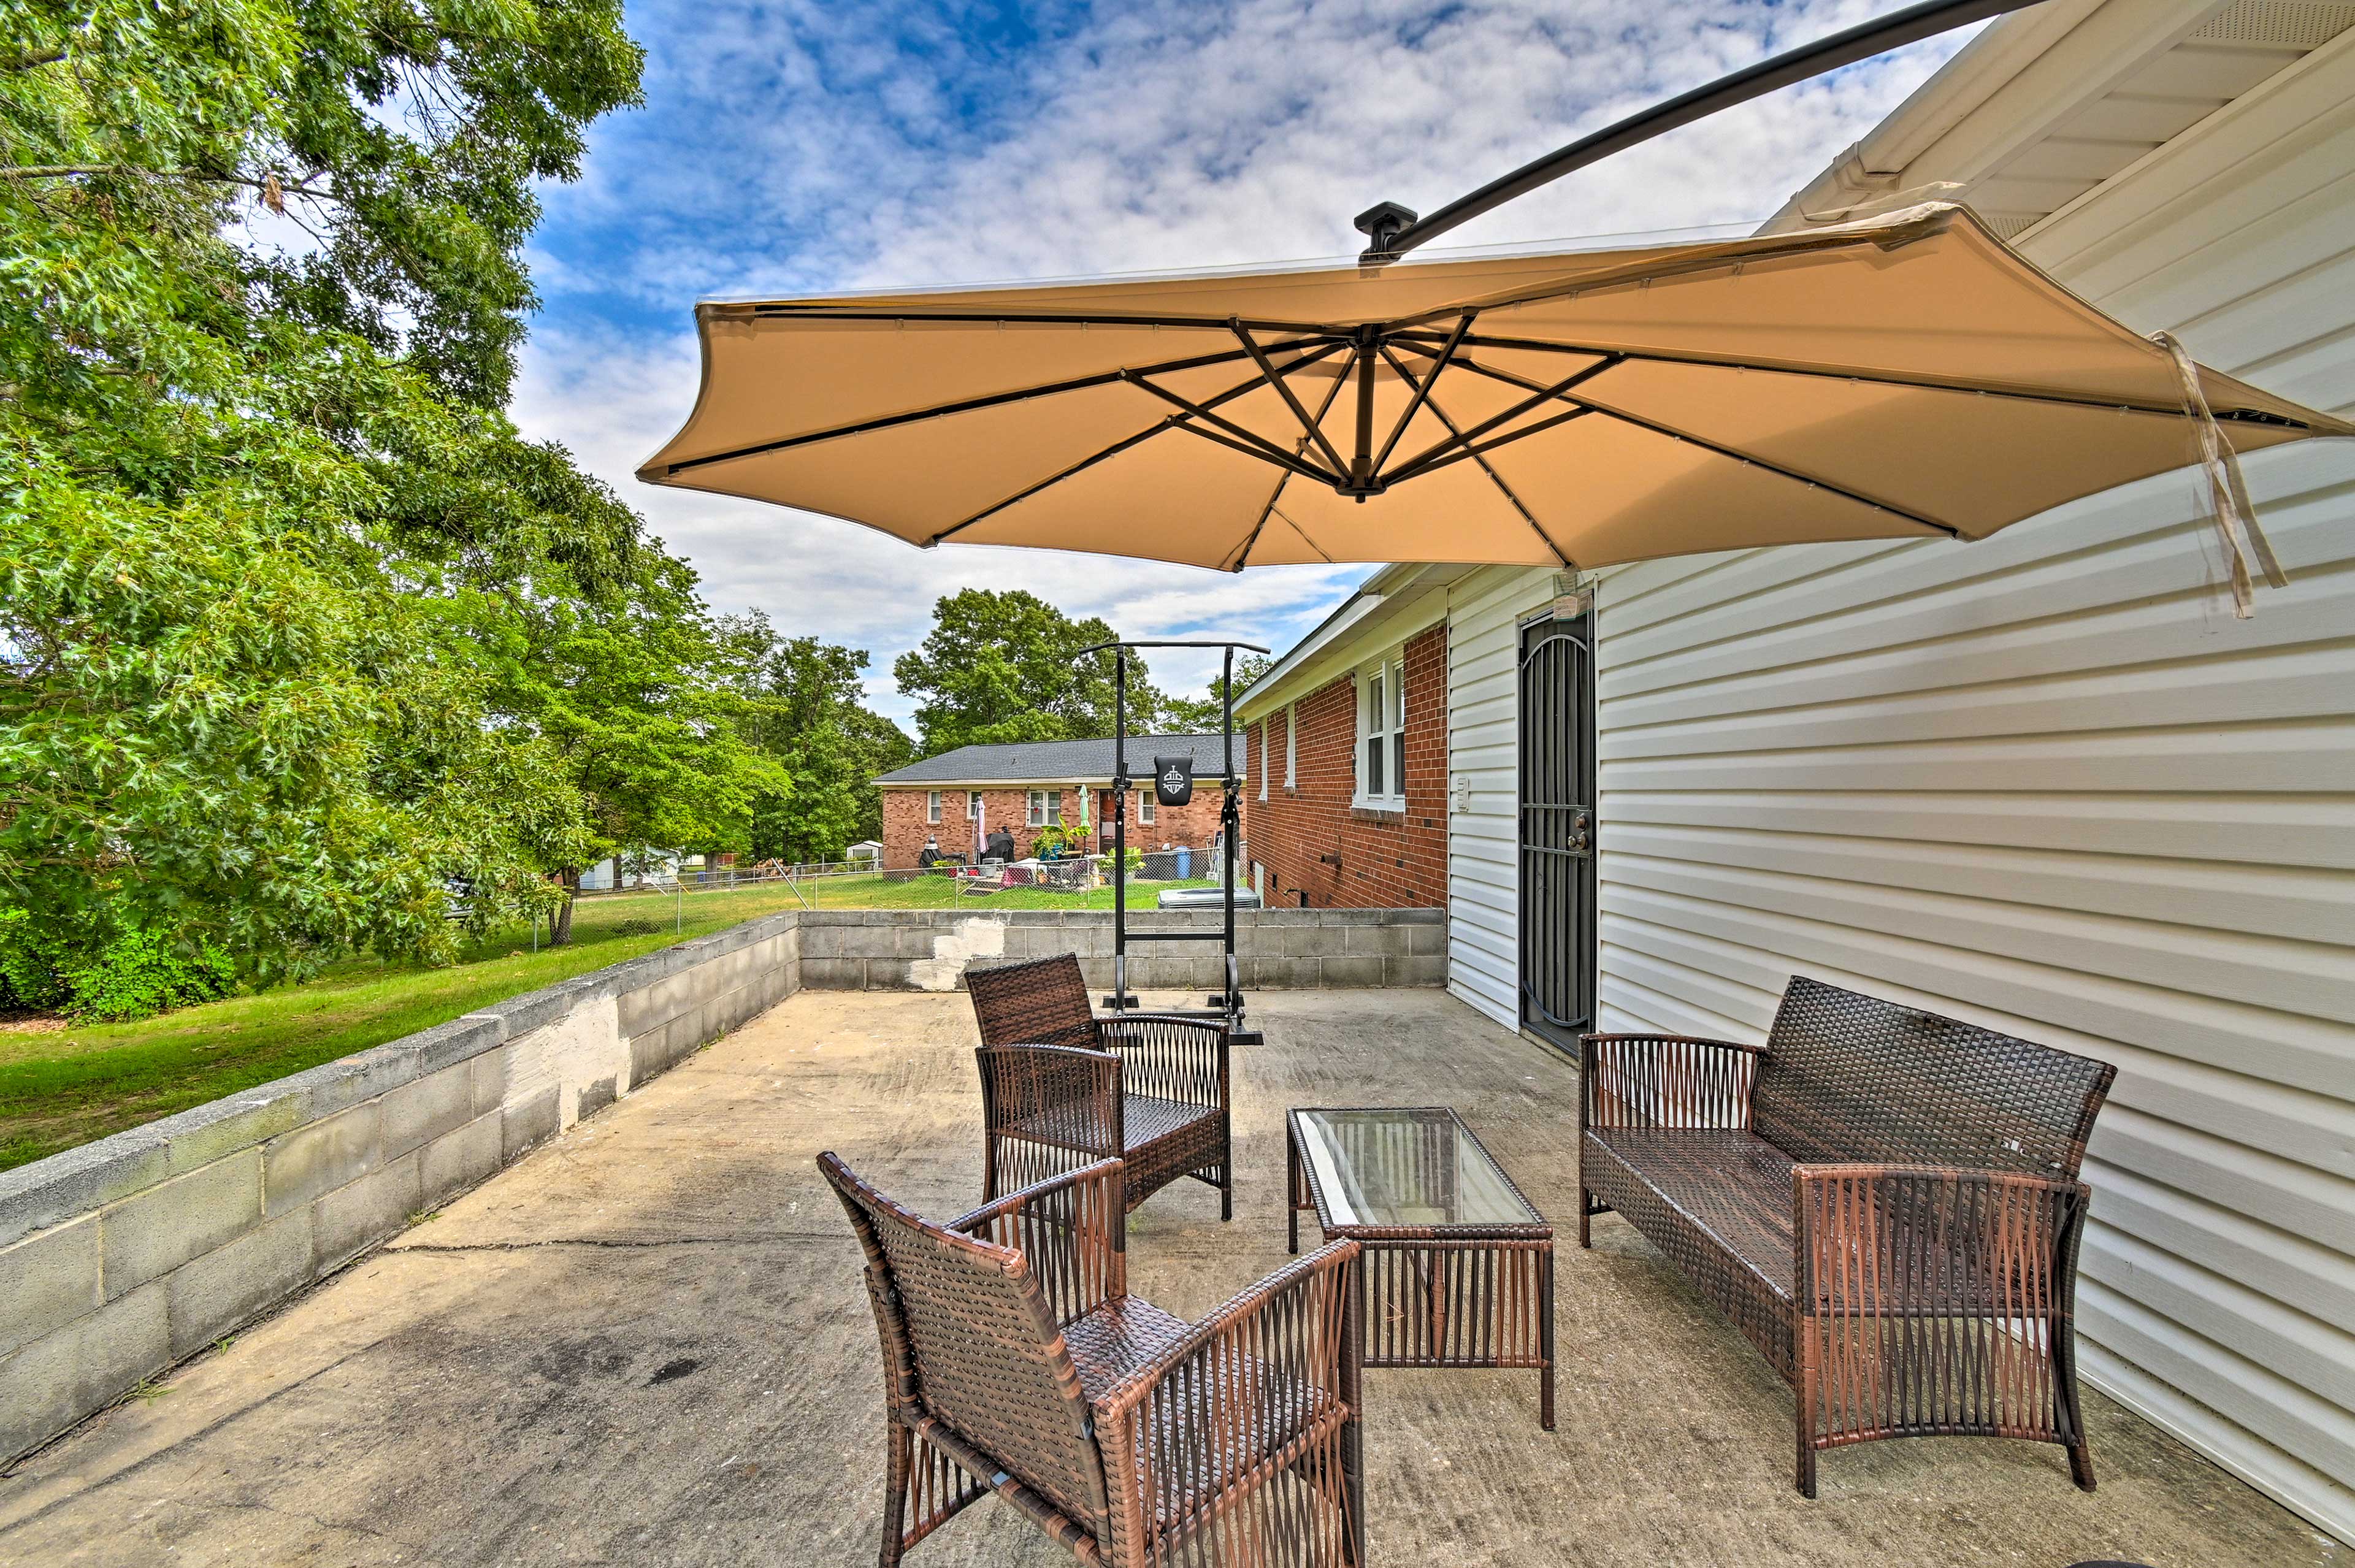 Fayetteville Vacation Rental | 3BR | 1BA | 1,450 Sq Ft | Step-Free Entry